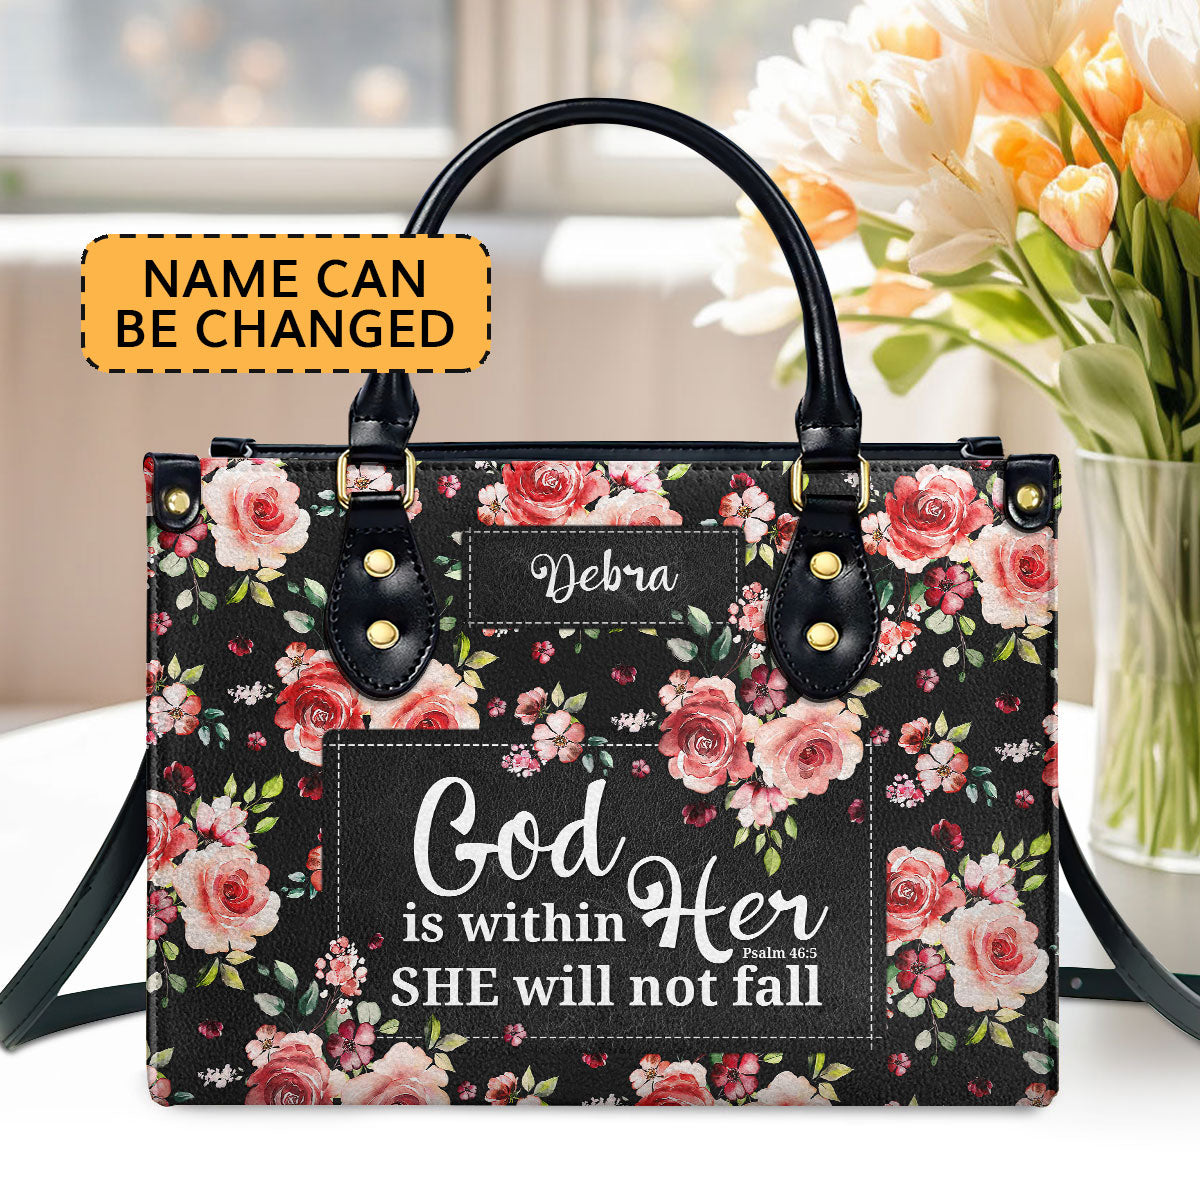 Jesuspirit | Spiritual Gift For Christian Ladies | Psalm 46:5 | God Is Within Her, She Will Not Fall | Personalized Leather Handbag With Handle LHBHN807